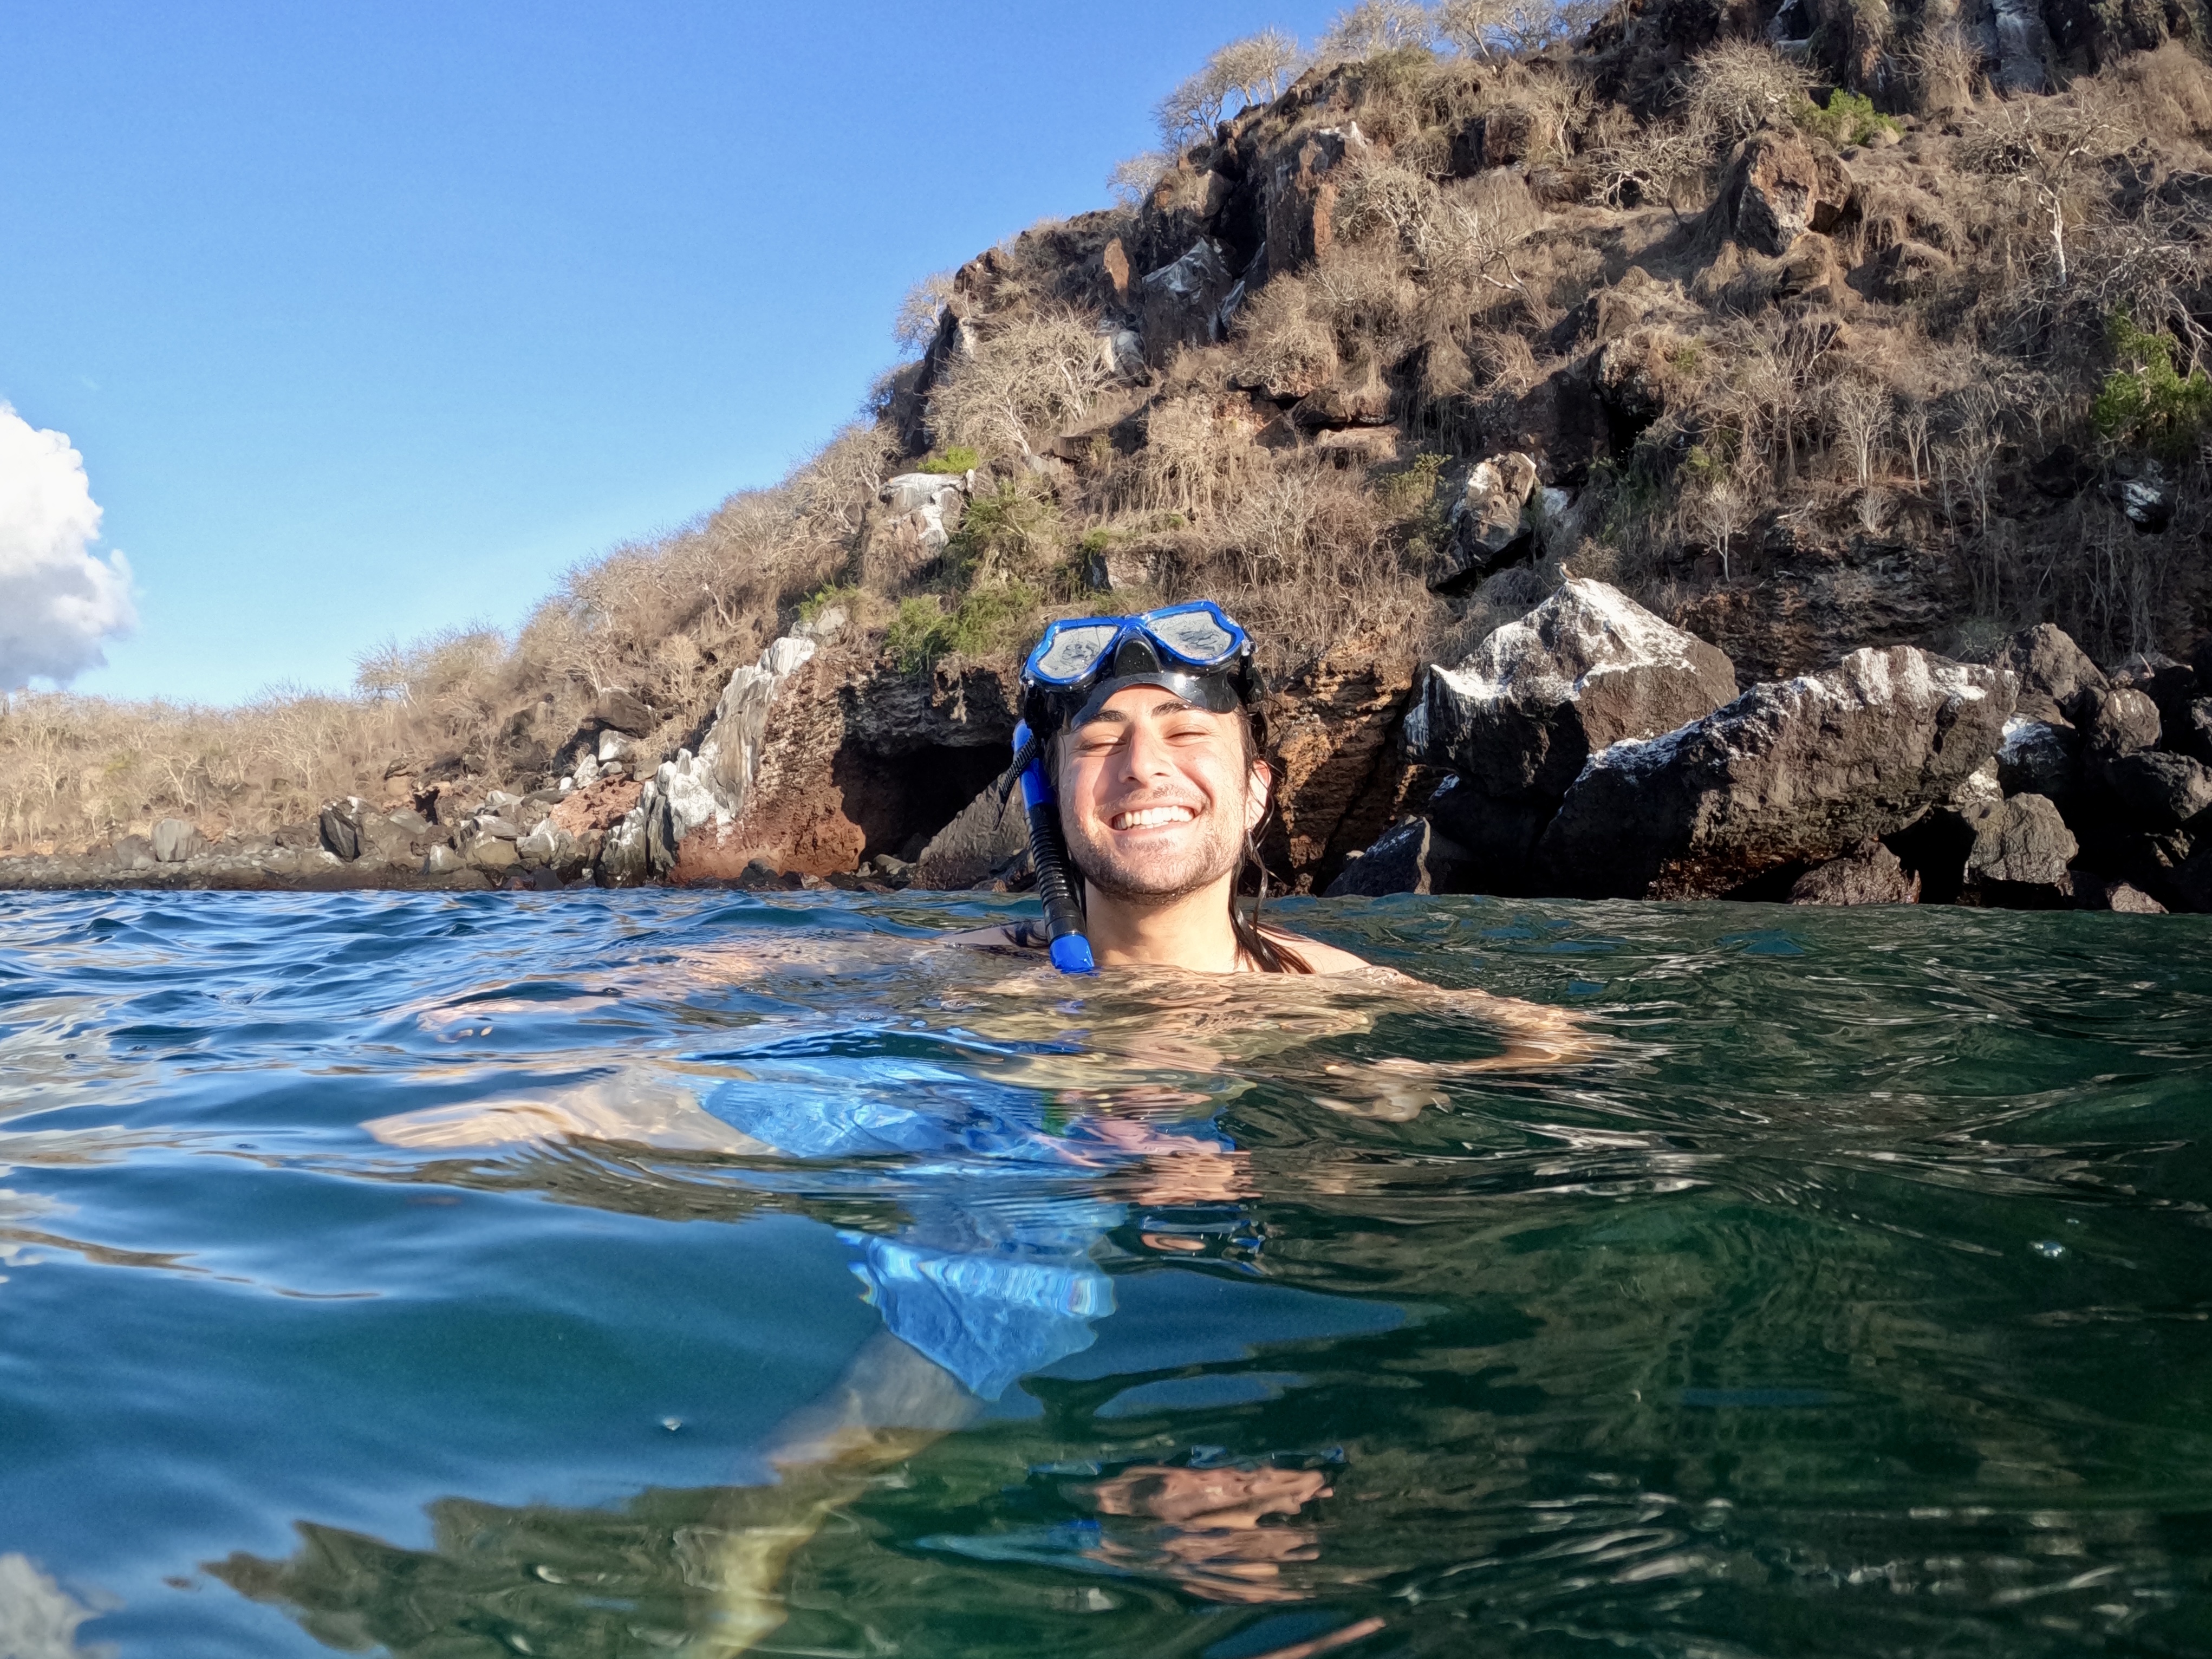 Saul grins as his head peeks out of the clear blue water, with the cliffside behind him. Goggles are perched on his head.